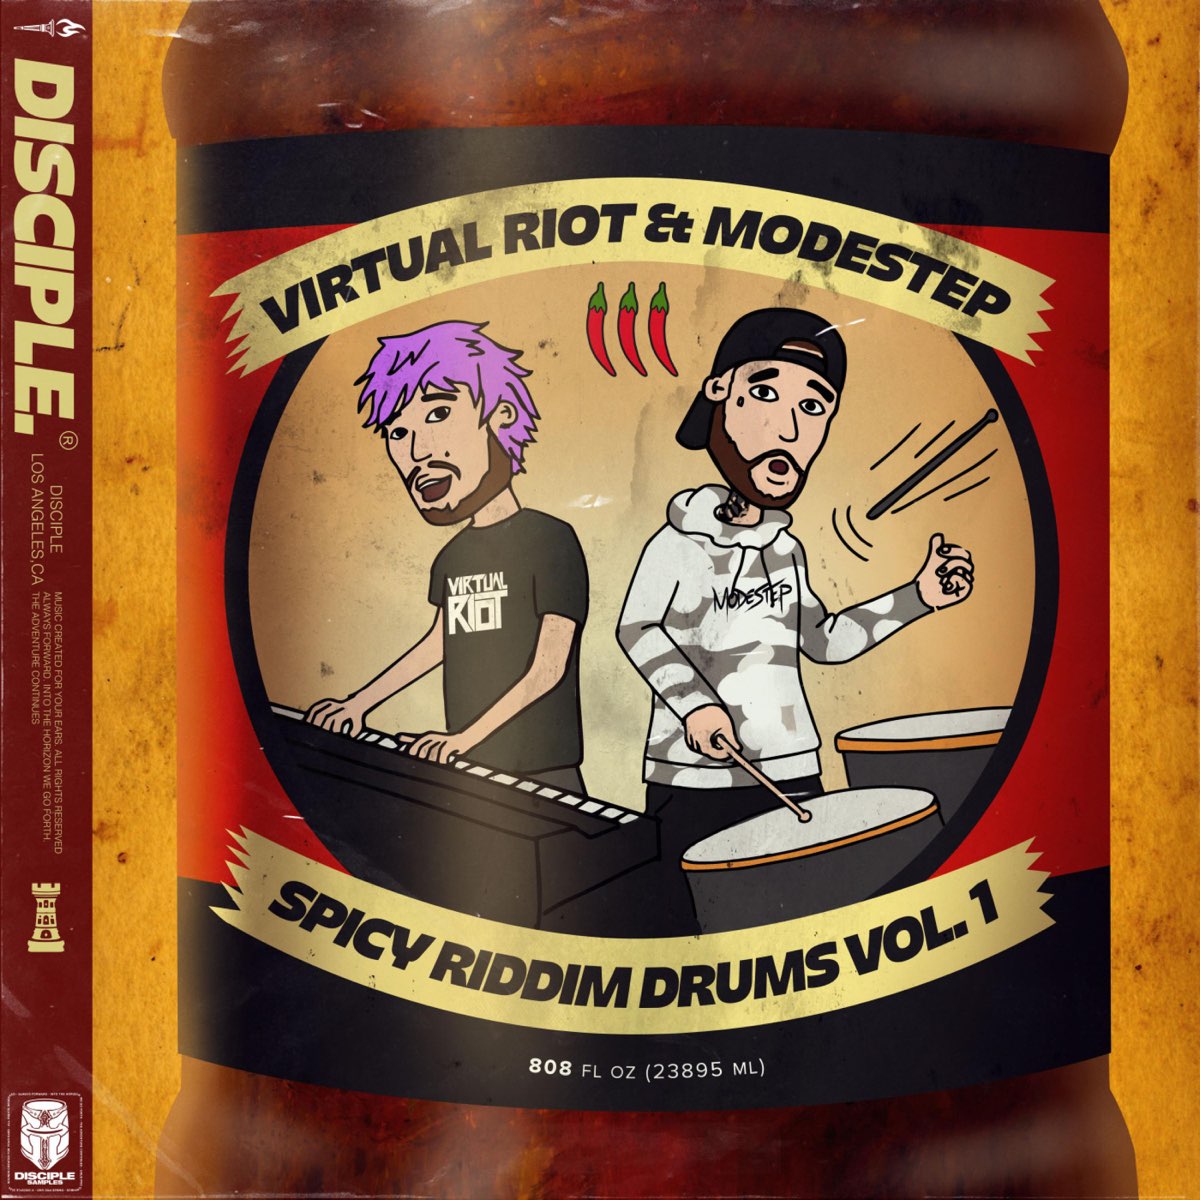 Spicy Riddim Drums [Sample Pack Demo] - Single by Virtual Riot & Disciple  on Apple Music